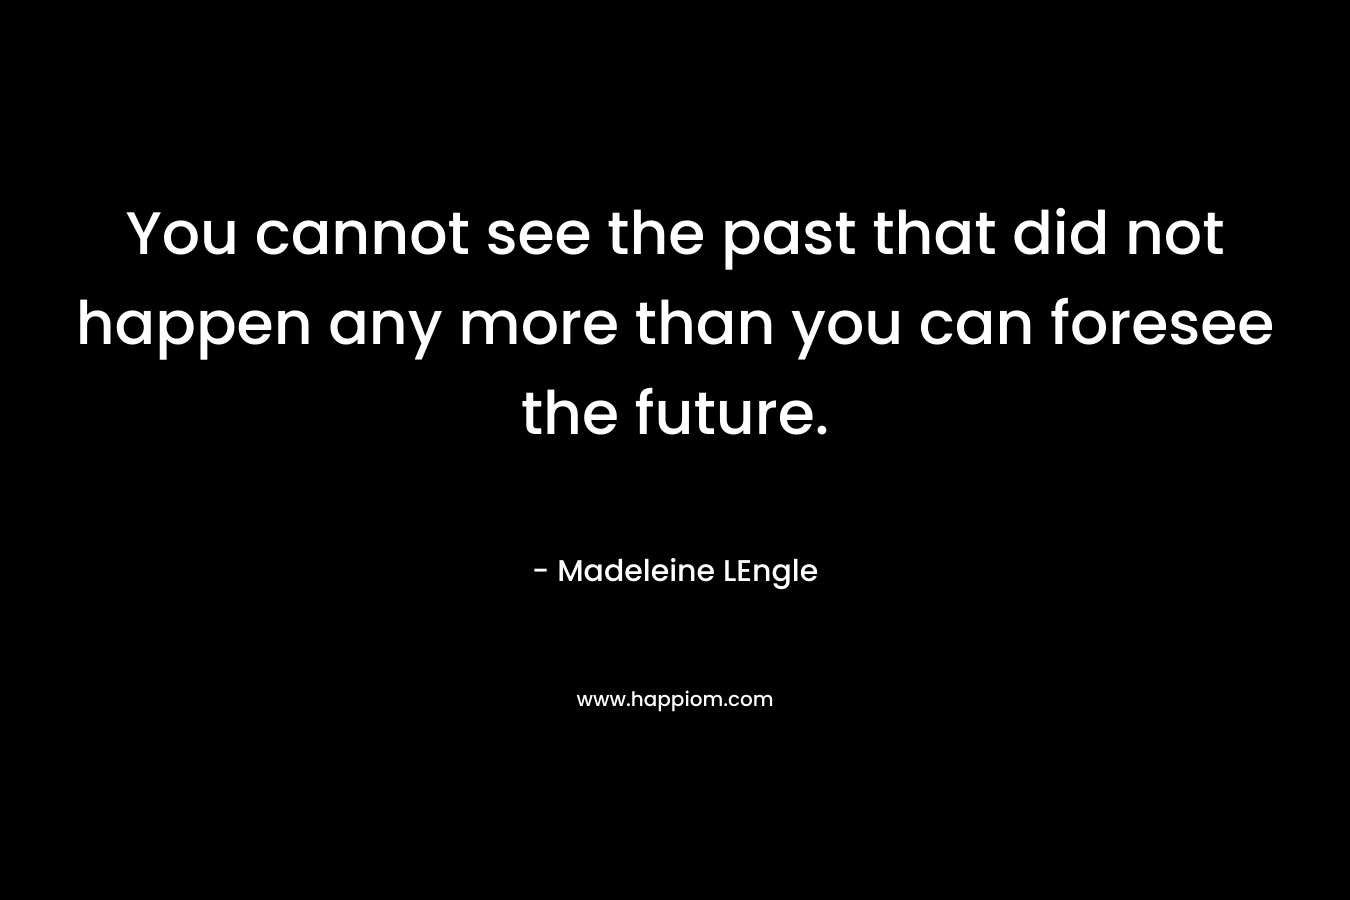 You cannot see the past that did not happen any more than you can foresee the future. – Madeleine LEngle